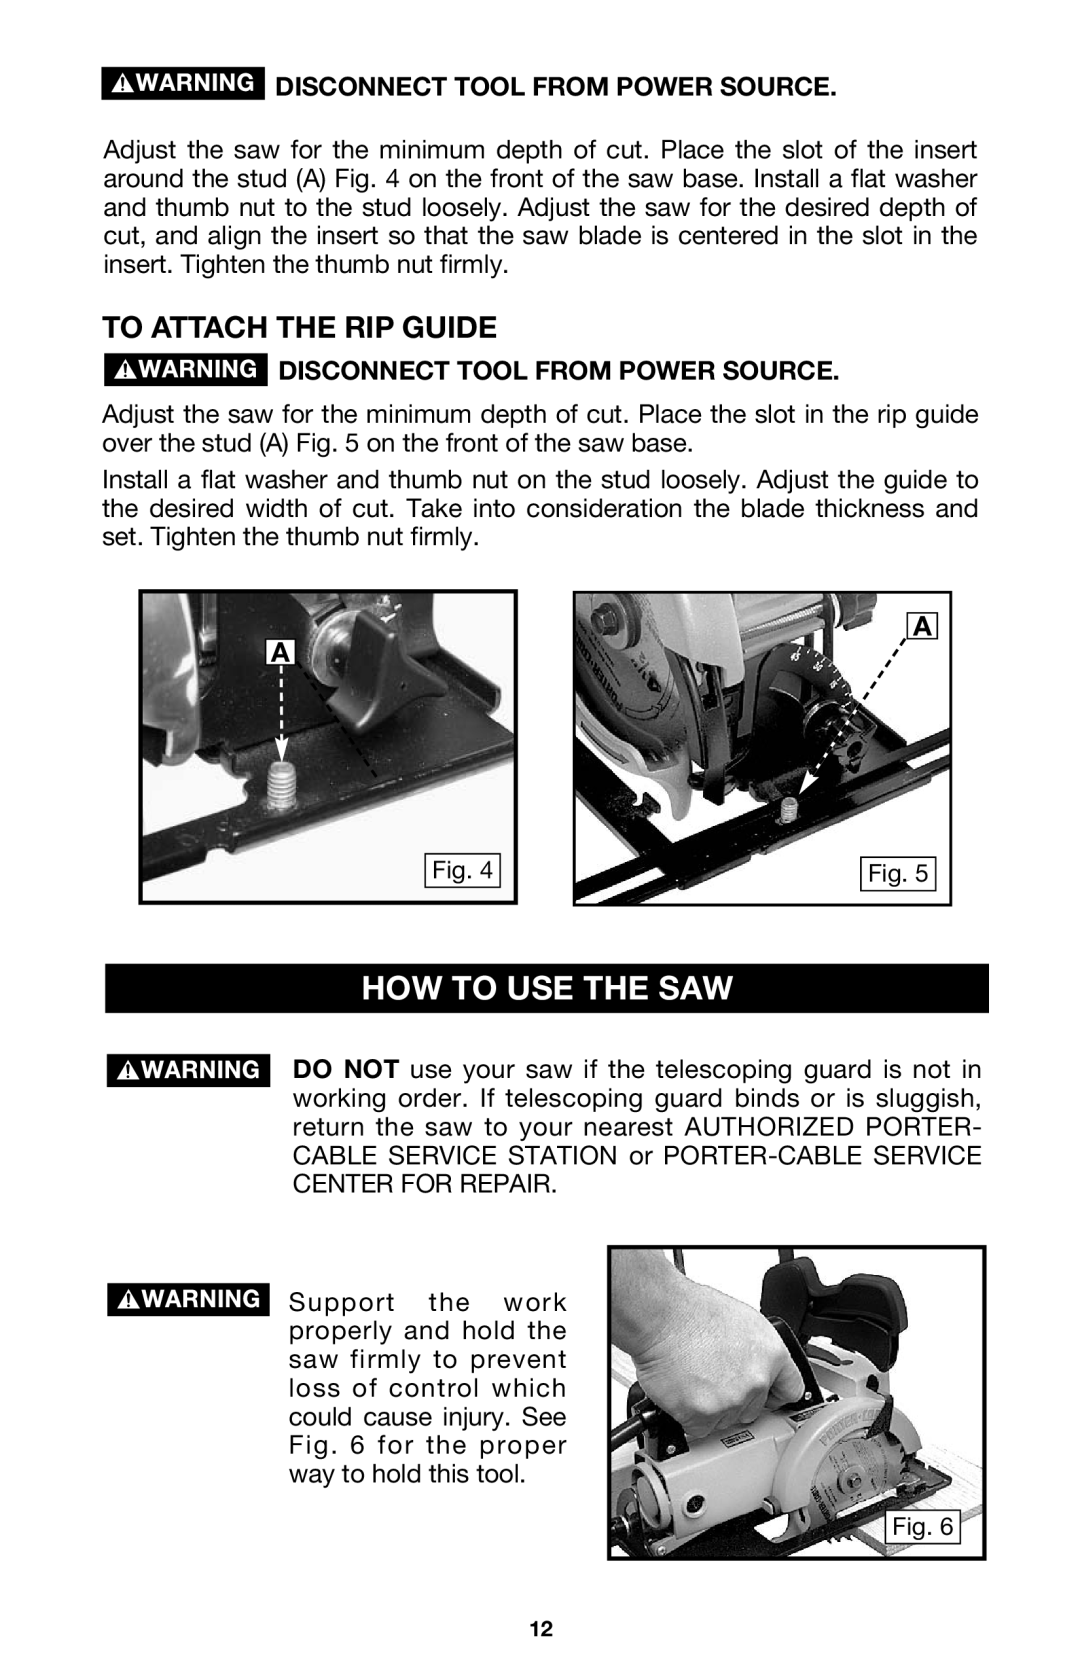 PYLE Audio 314 instruction manual How To Use The Saw, To Attach The Rip Guide, Disconnect Tool From Power Source 